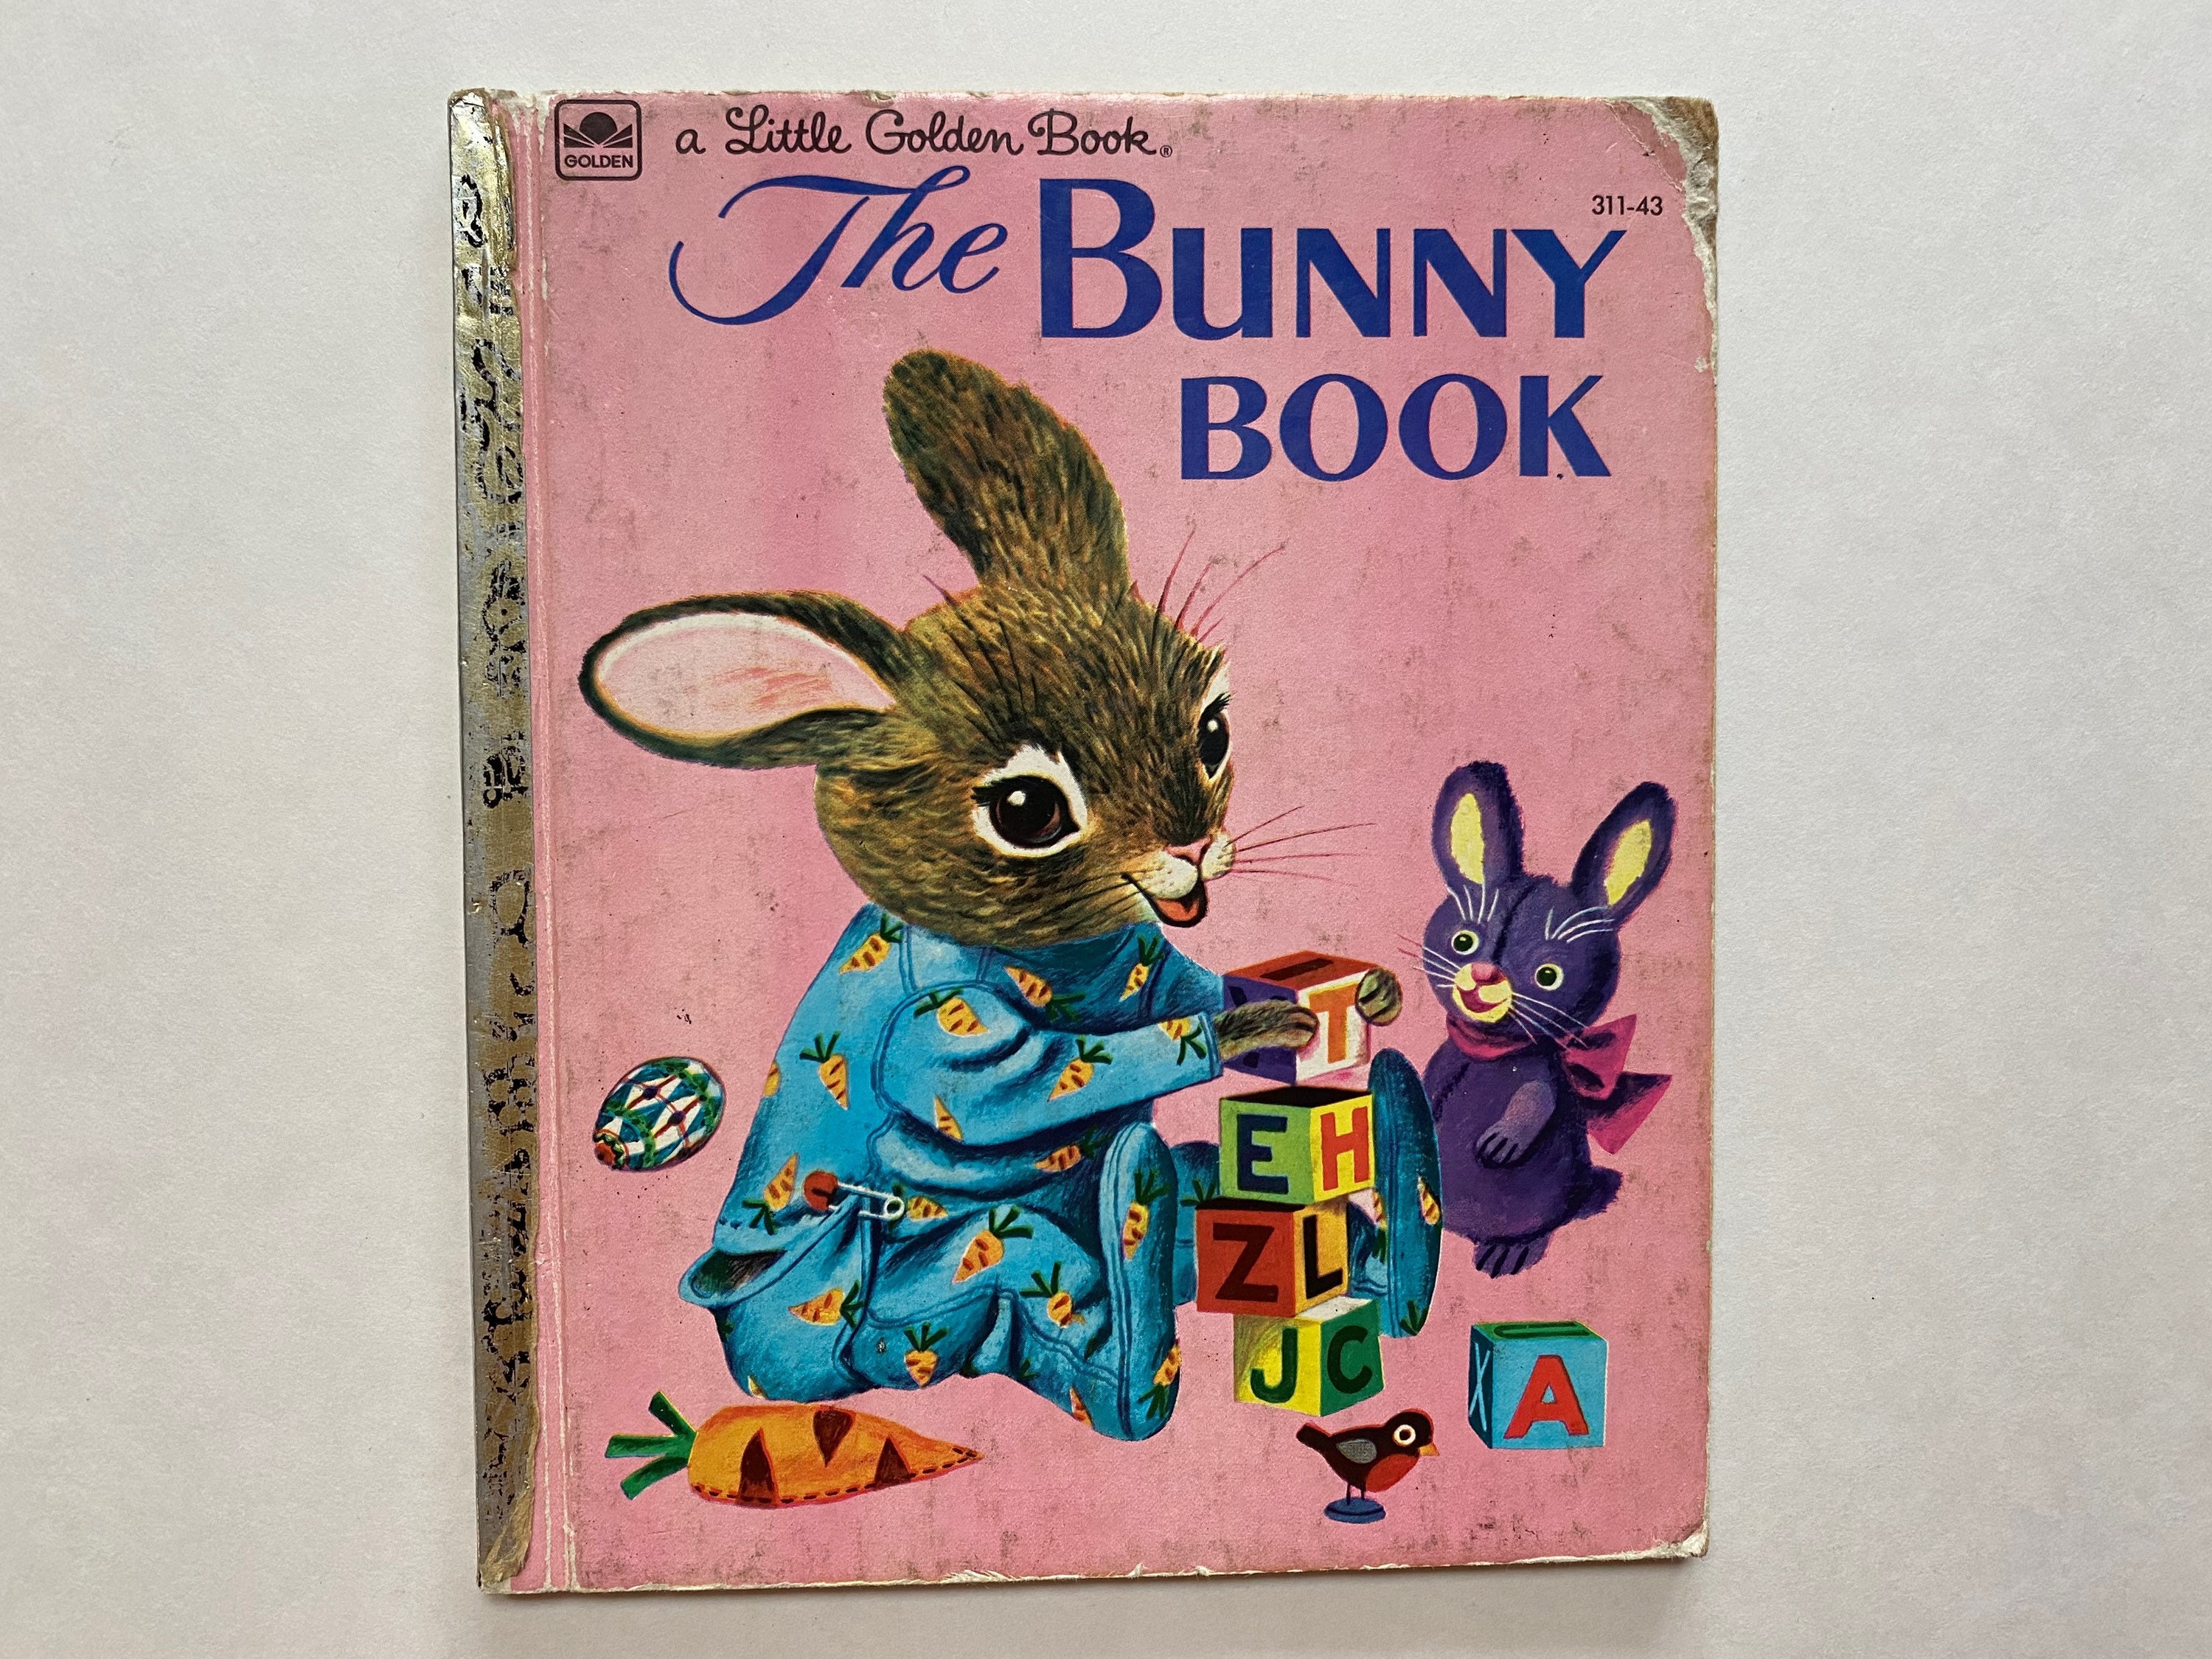 Follow the White Bunny: Embroidery Books from the Past